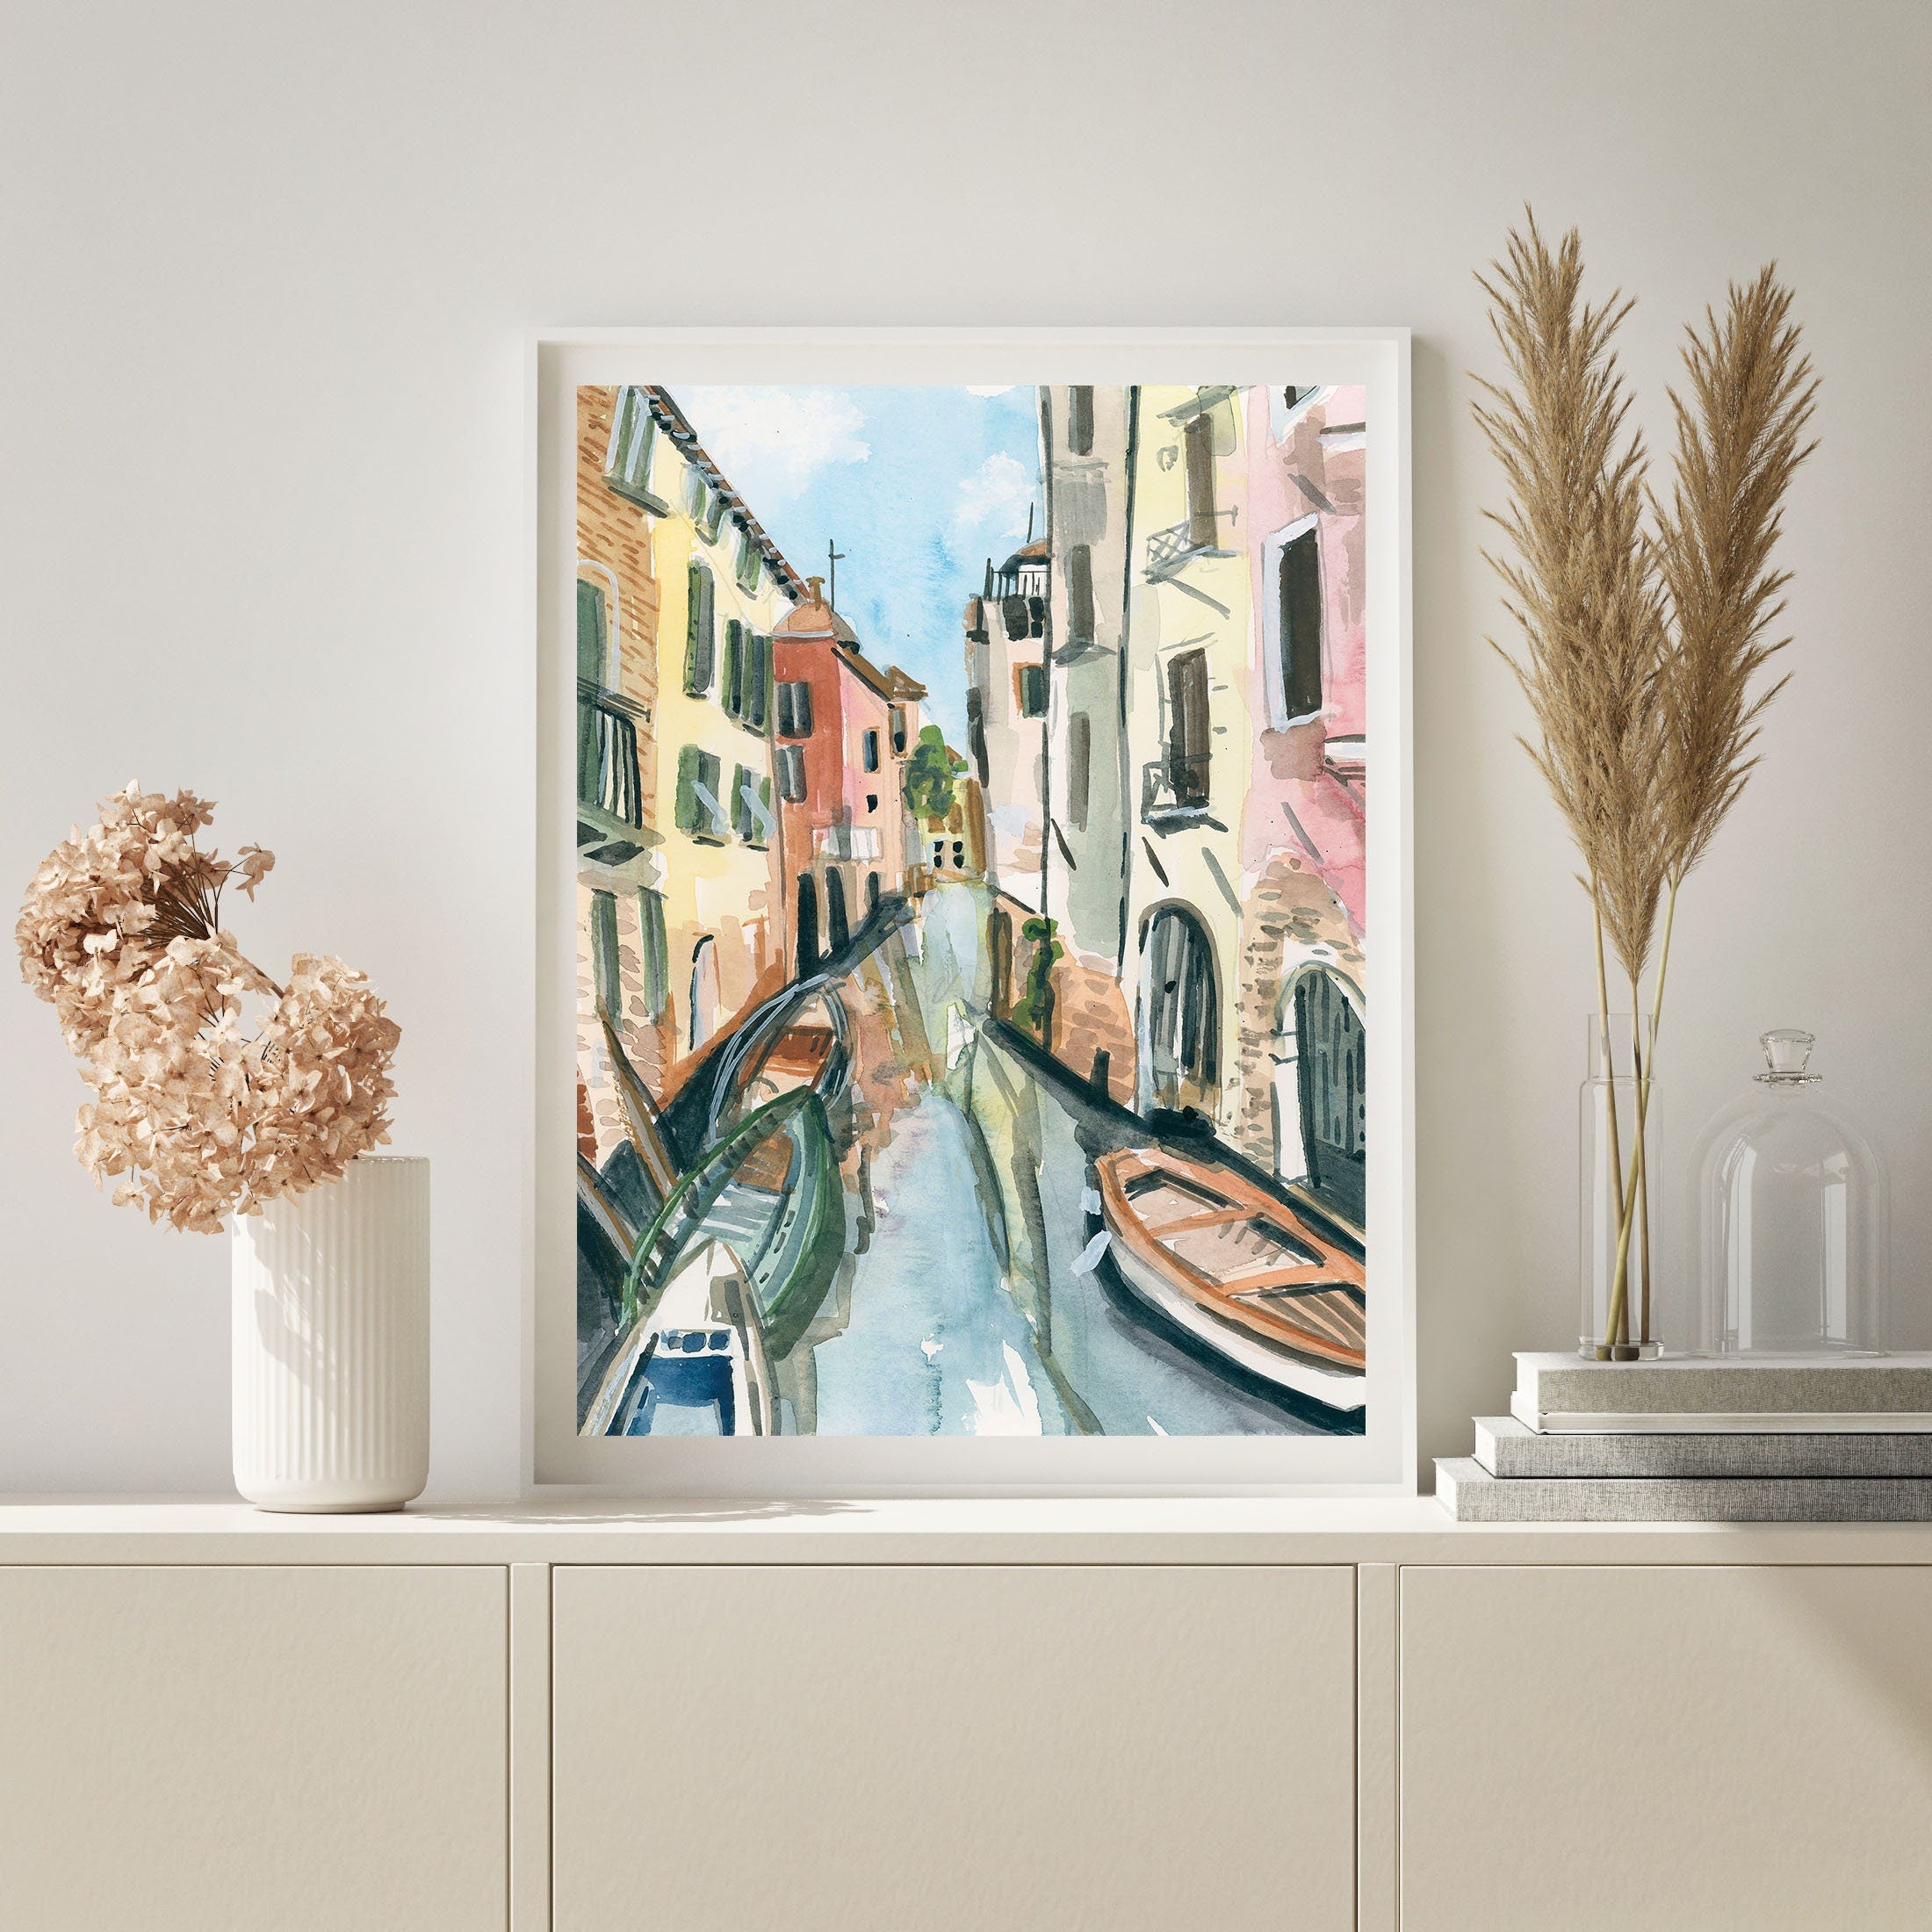 Venice canal print of painting by Medjool Studio. Print of an original gouache painting of the Venice Canal, including iconic buildings, from the perspective of being in a boat.